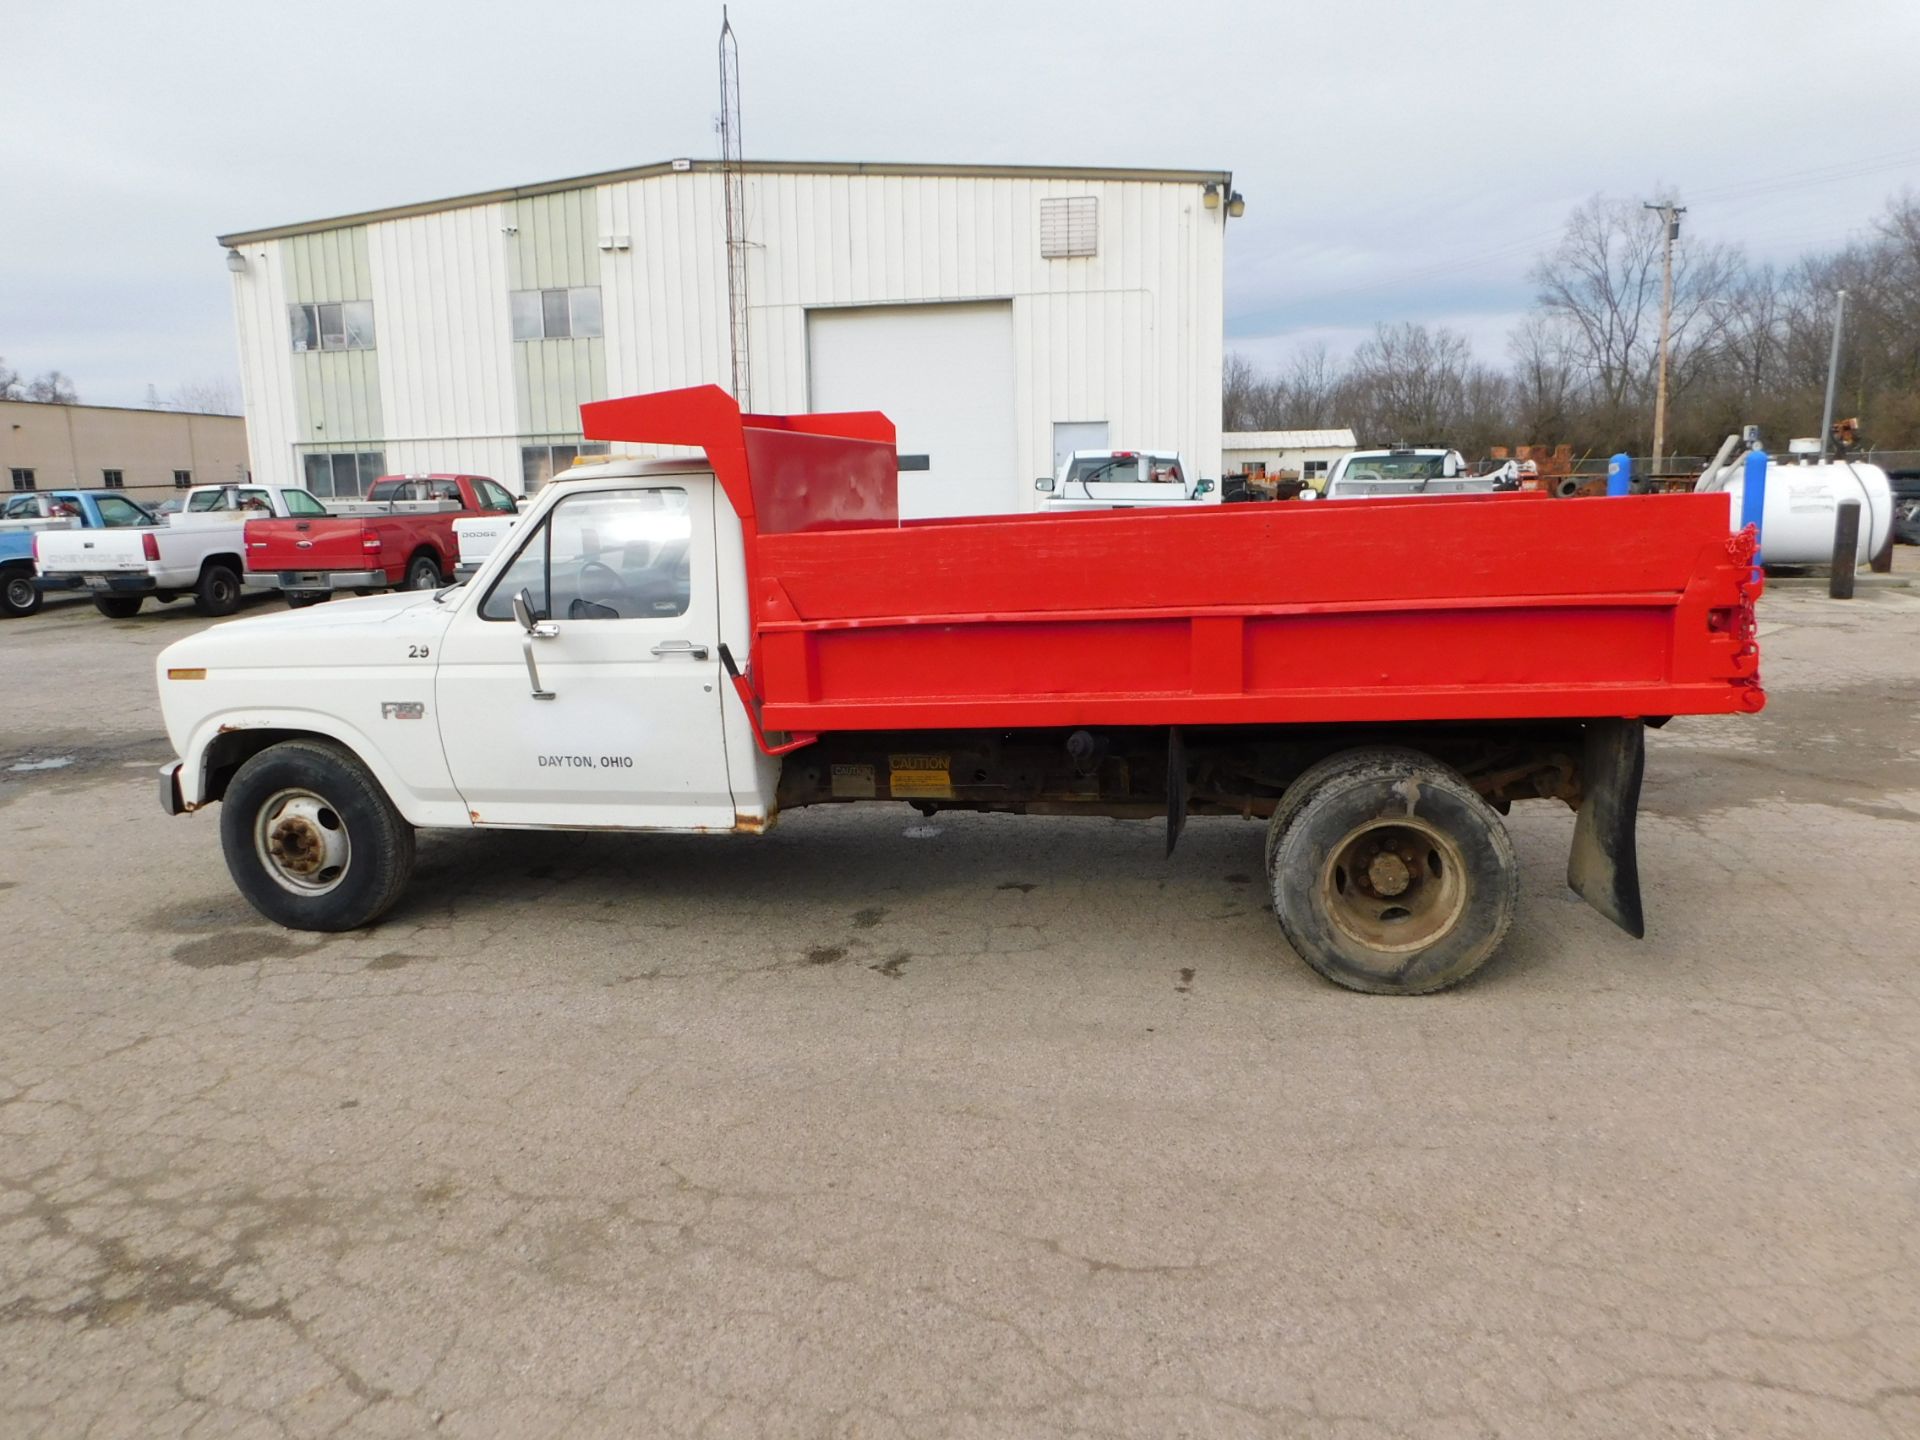 1986 Ford F-350 Single Axle Dump, Gas, 4-Speed Manual Transmission, PTO, 10' Steel Dump Bed, 81, - Image 8 of 18